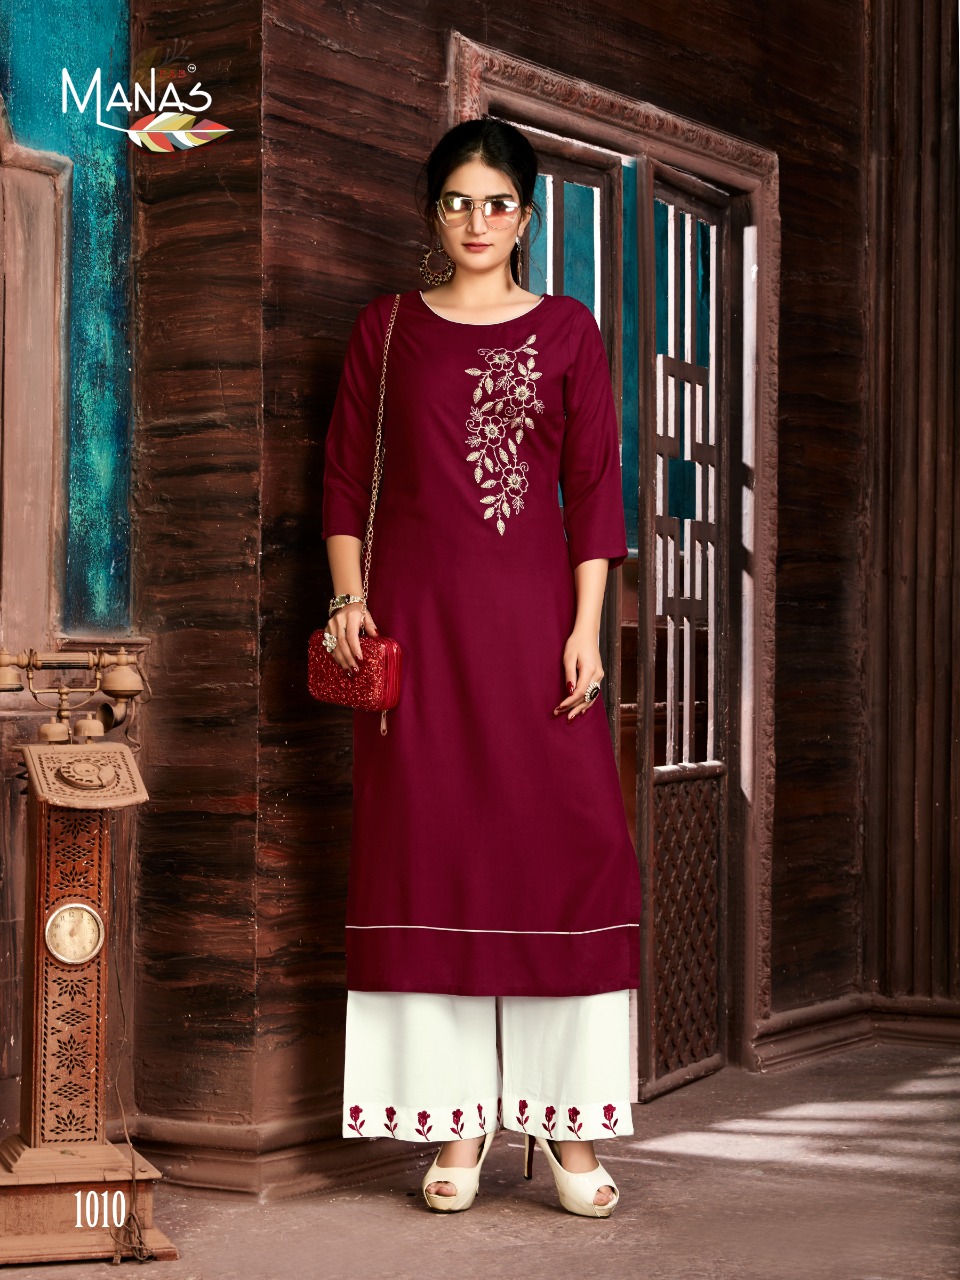 Manas anishka vol-3 classy catchy look Kurties in wholesale prices